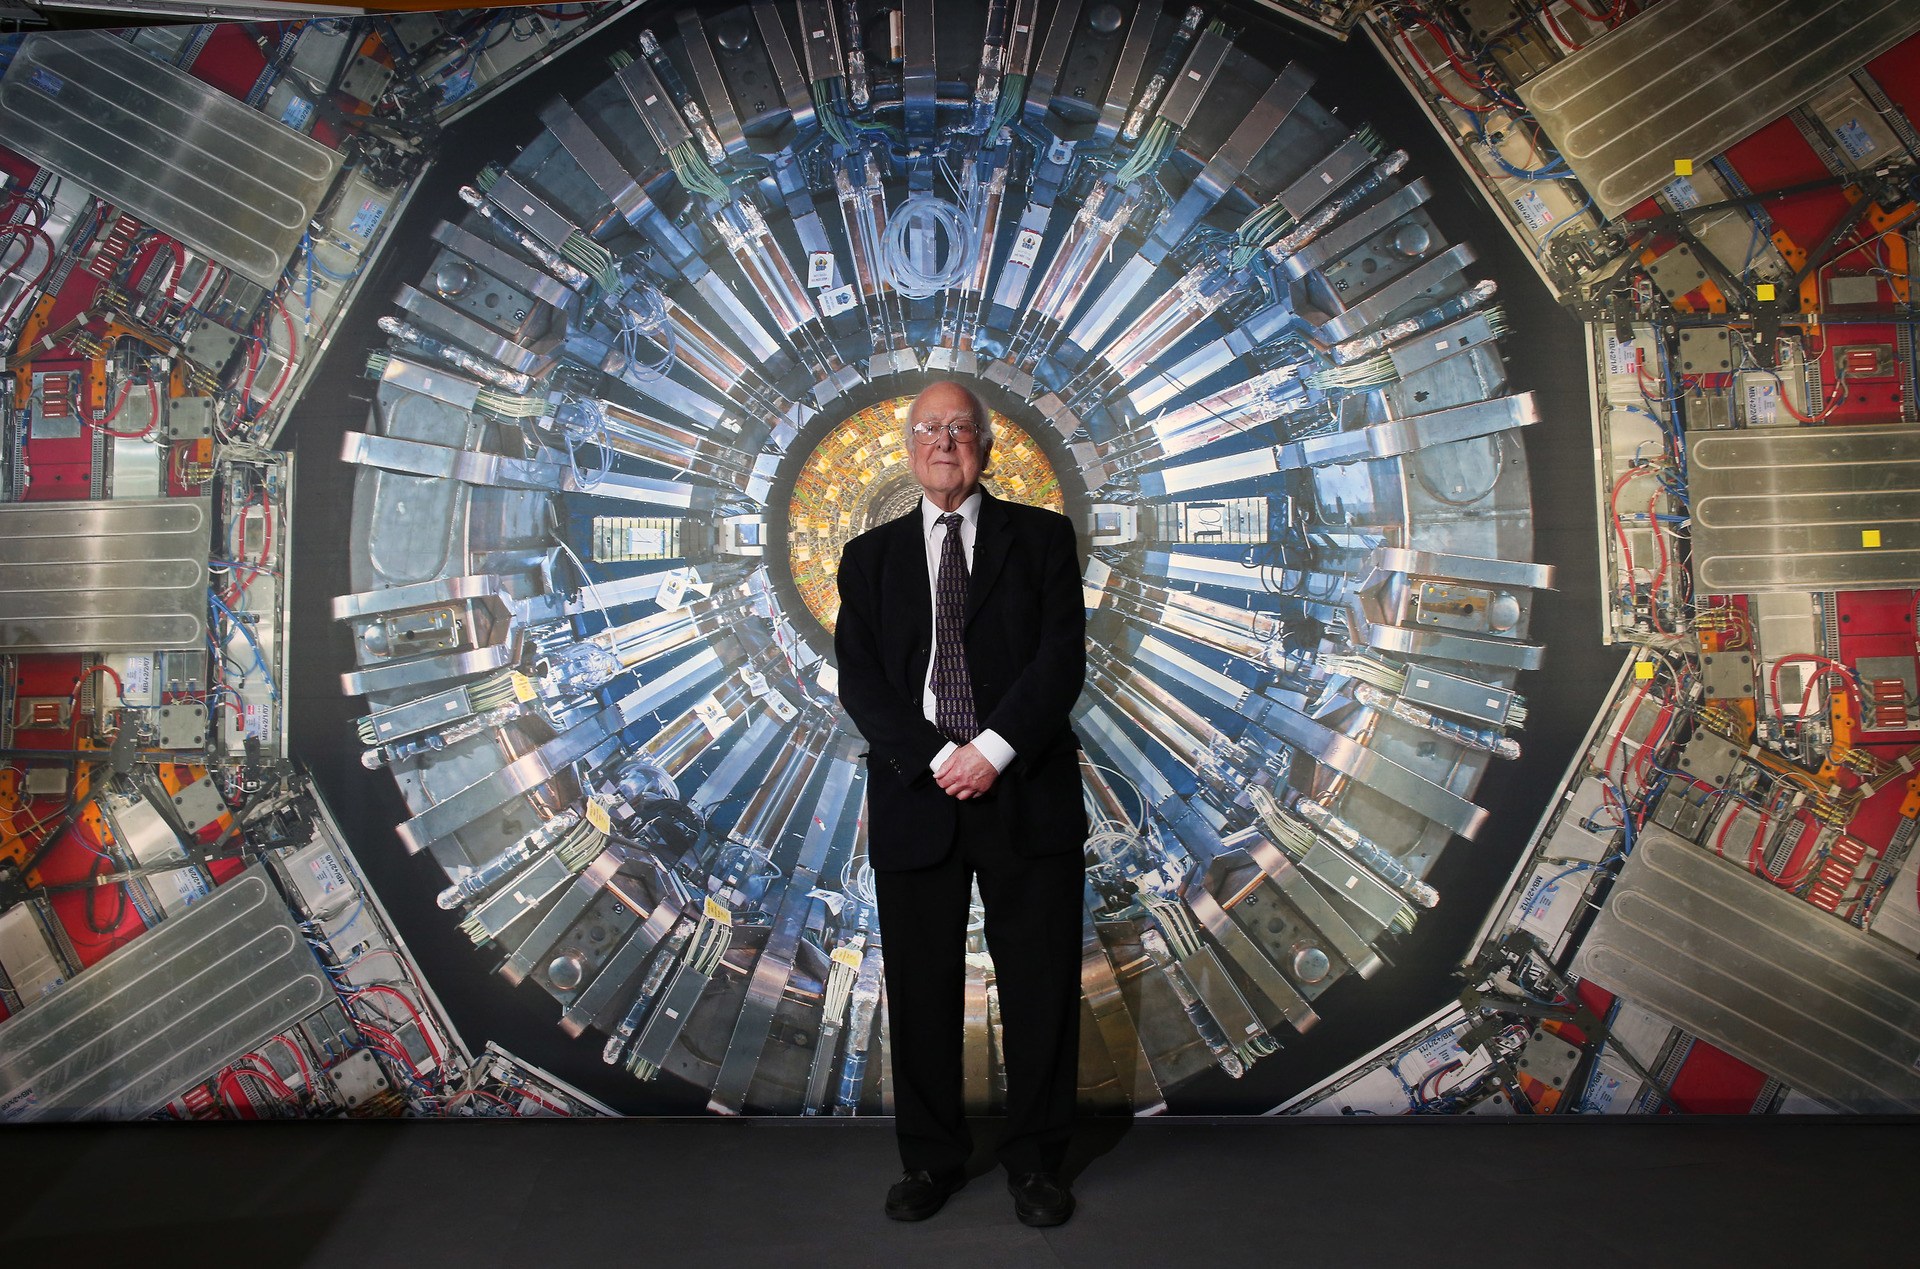 Professor Peter Higgs stands in front of a photograph of the Large Hadron Collider.